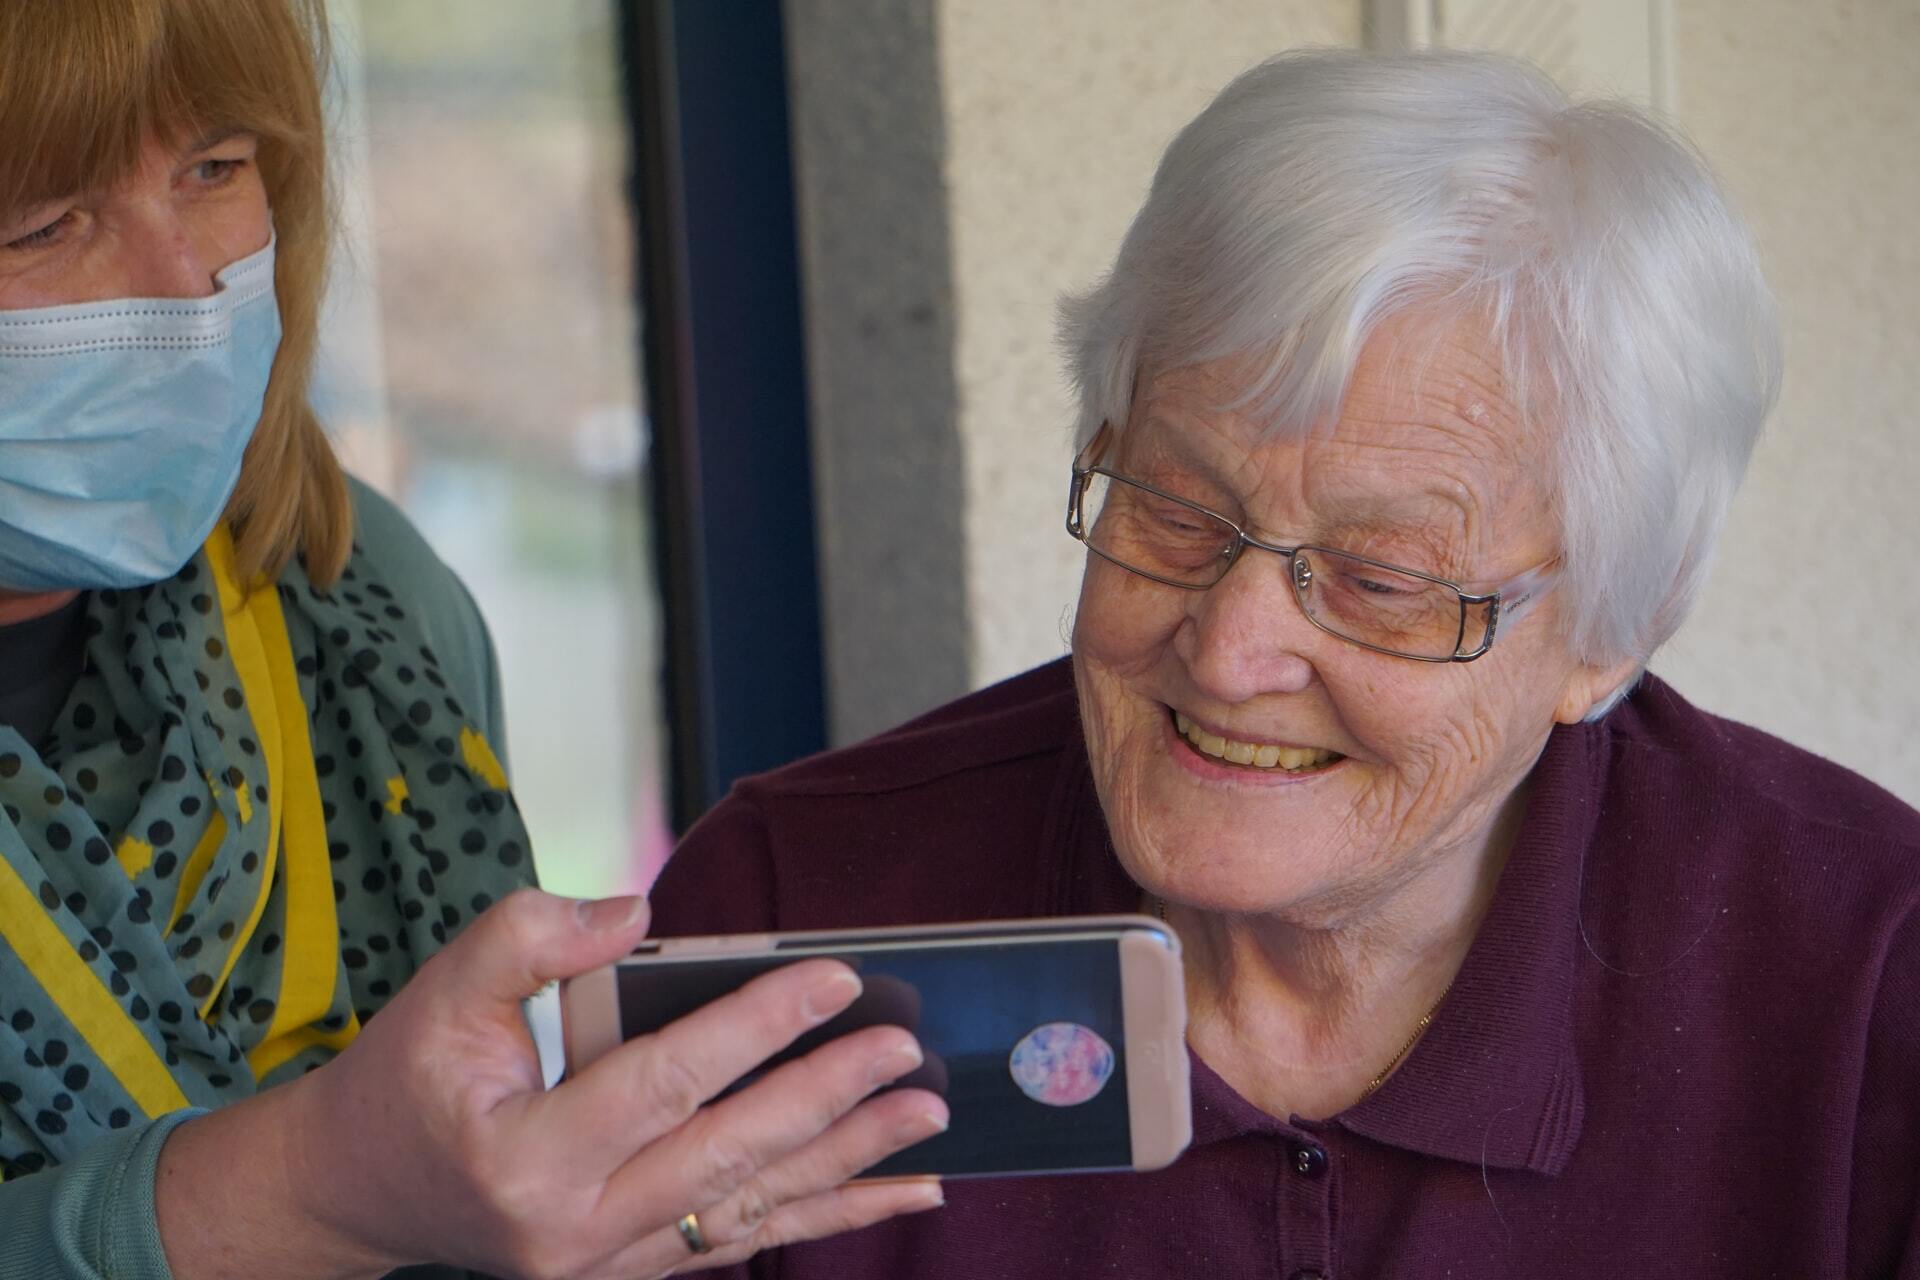 How Technology Can Help Seniors and People with Dementia to Connect